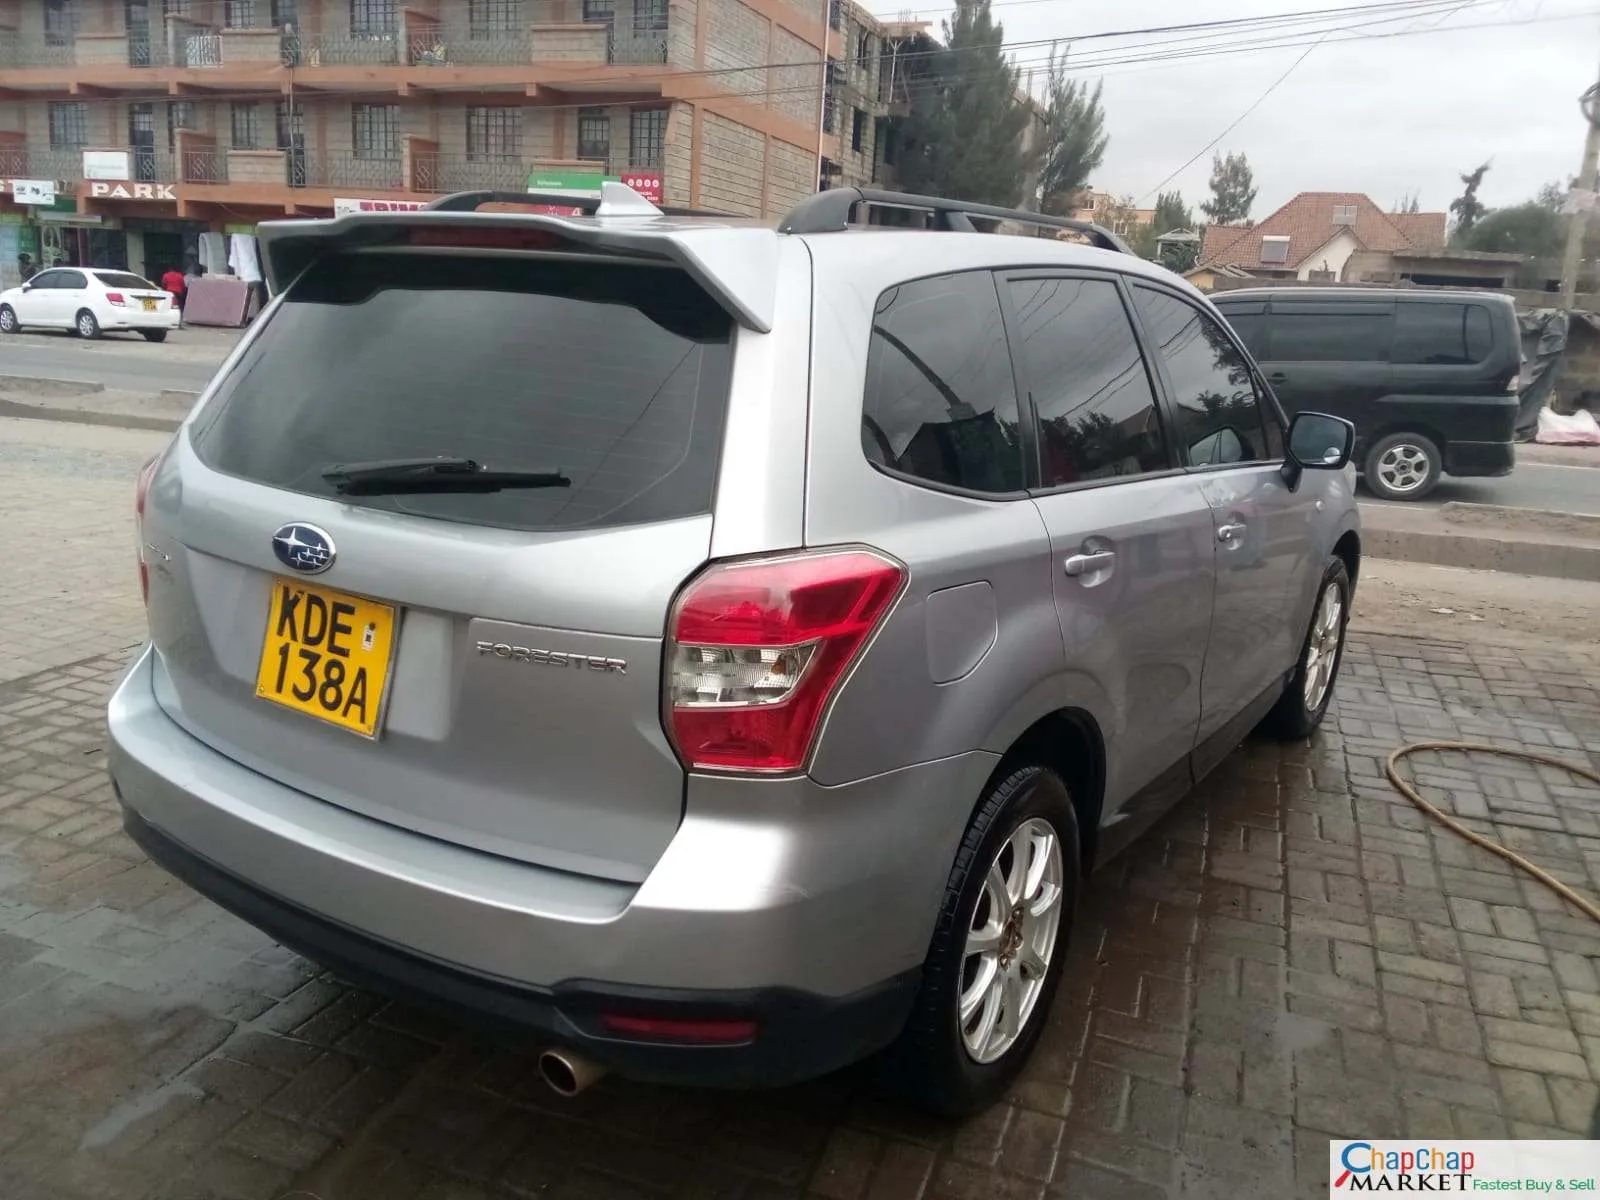 Cars Cars For Sale-Subaru Forester for sale in Kenya You Pay 30% deposit Trade in Ok EXCLUSIVE 9